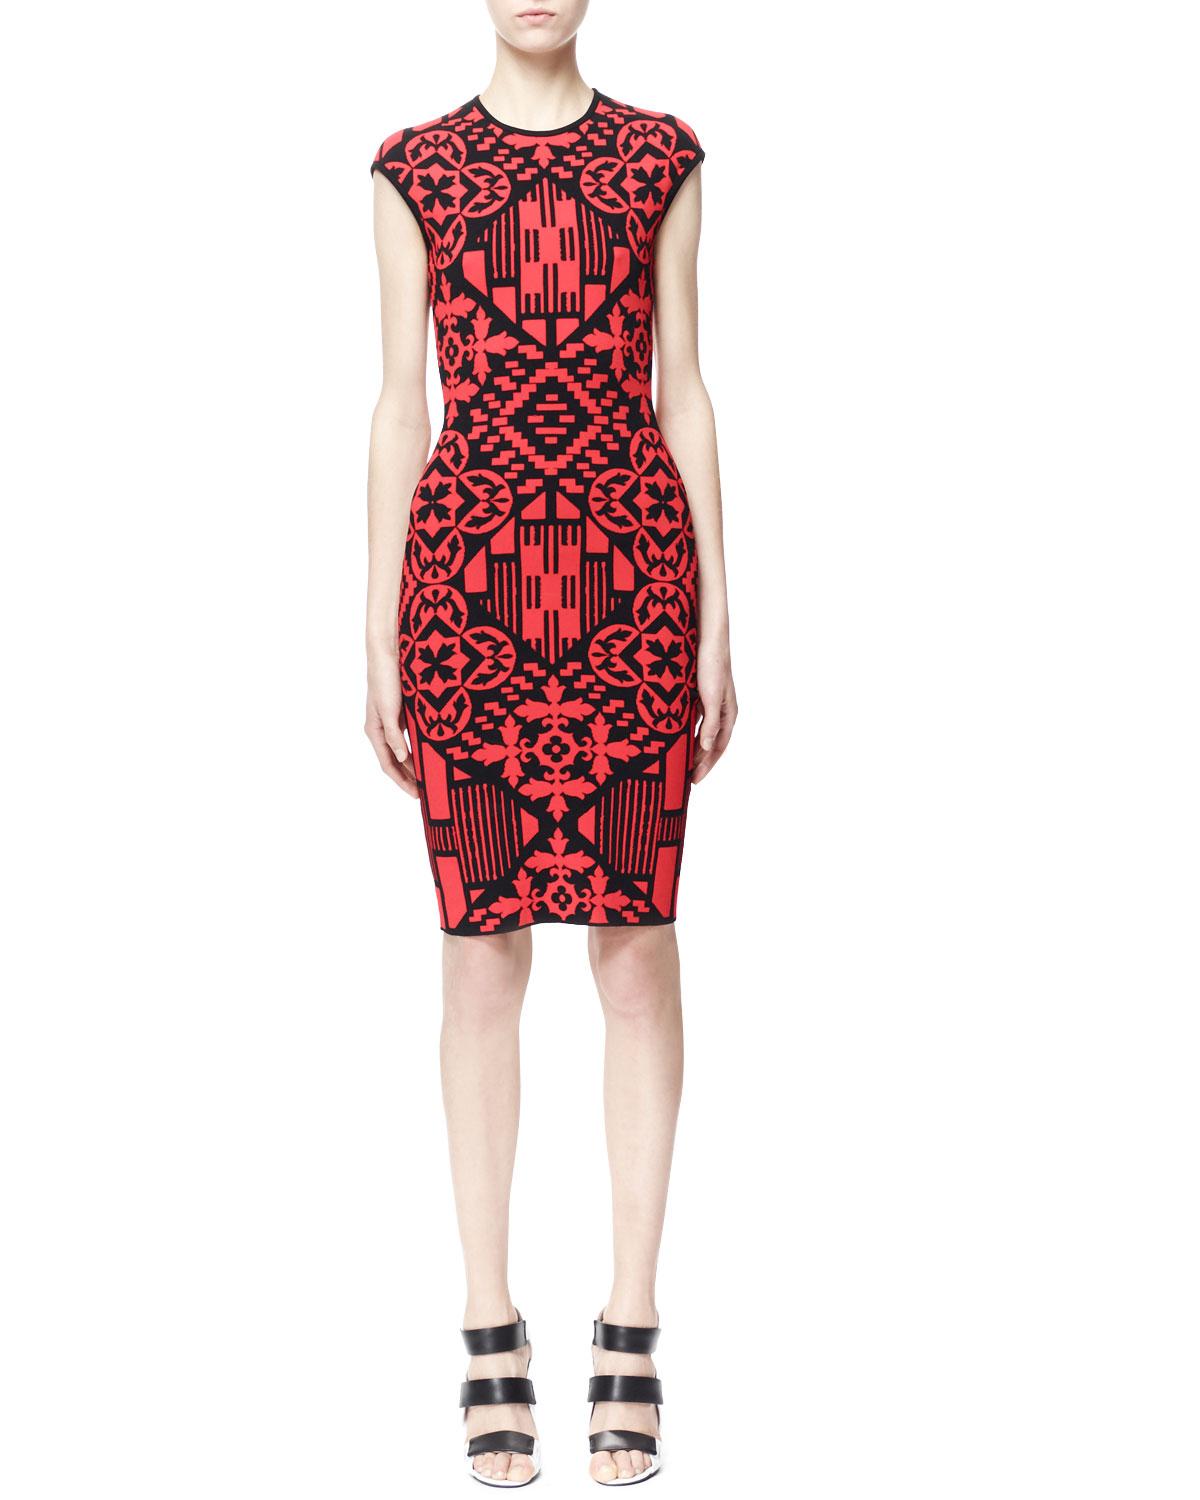 

Alexander McQueen Red Black Digital Damask Patchwork Jacquard Brick Dress Sheath Mini Vintage 90's Robe Evening Party Cocktail Dress

Original Bicolor Printed Alexander McQueen Dress. Made of printed fabric in red and black. The fitted model has a